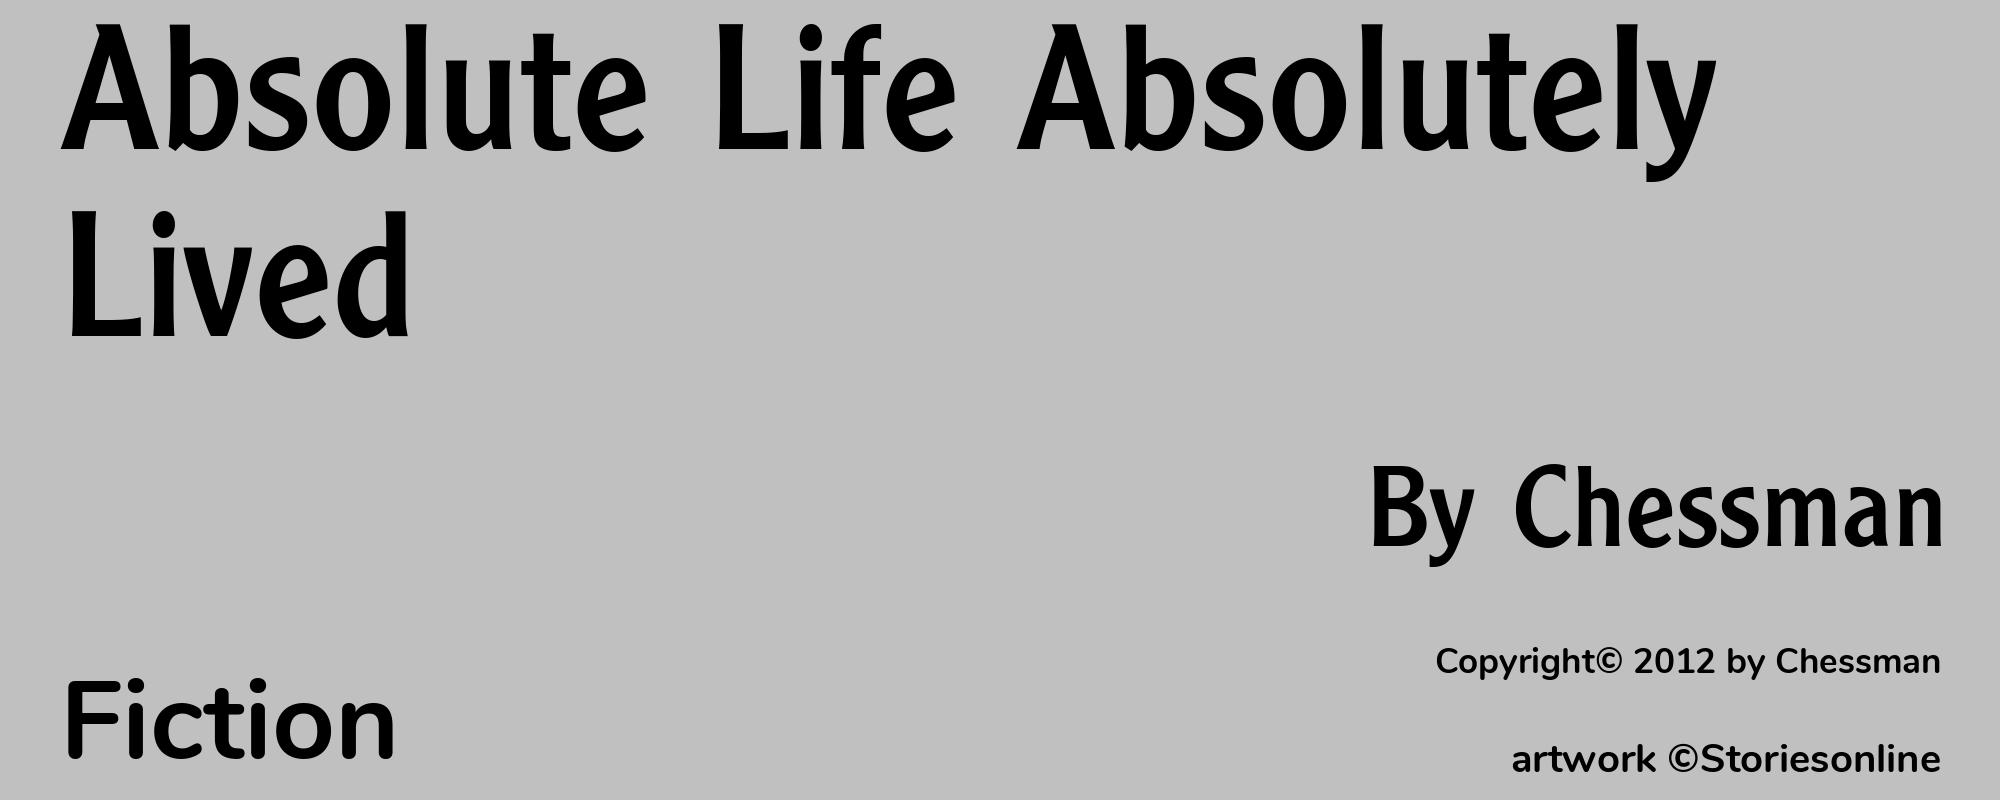 Absolute Life Absolutely Lived - Cover